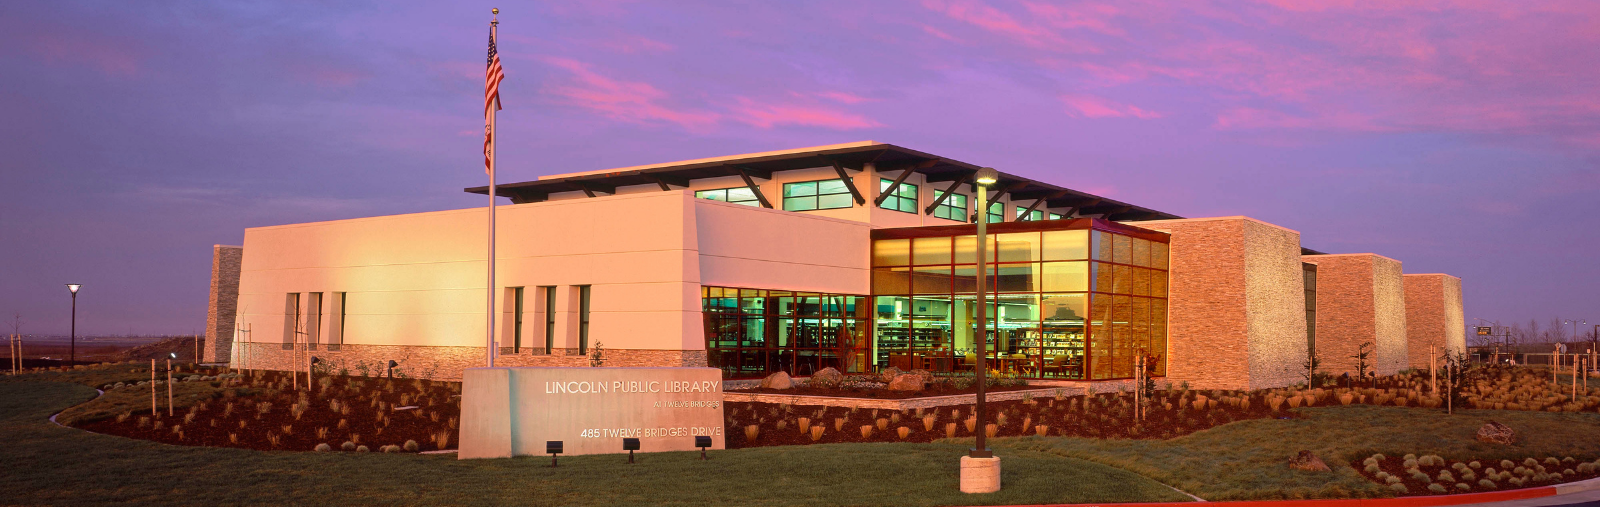 Exterior of the Twelve Bridges Library at sunset